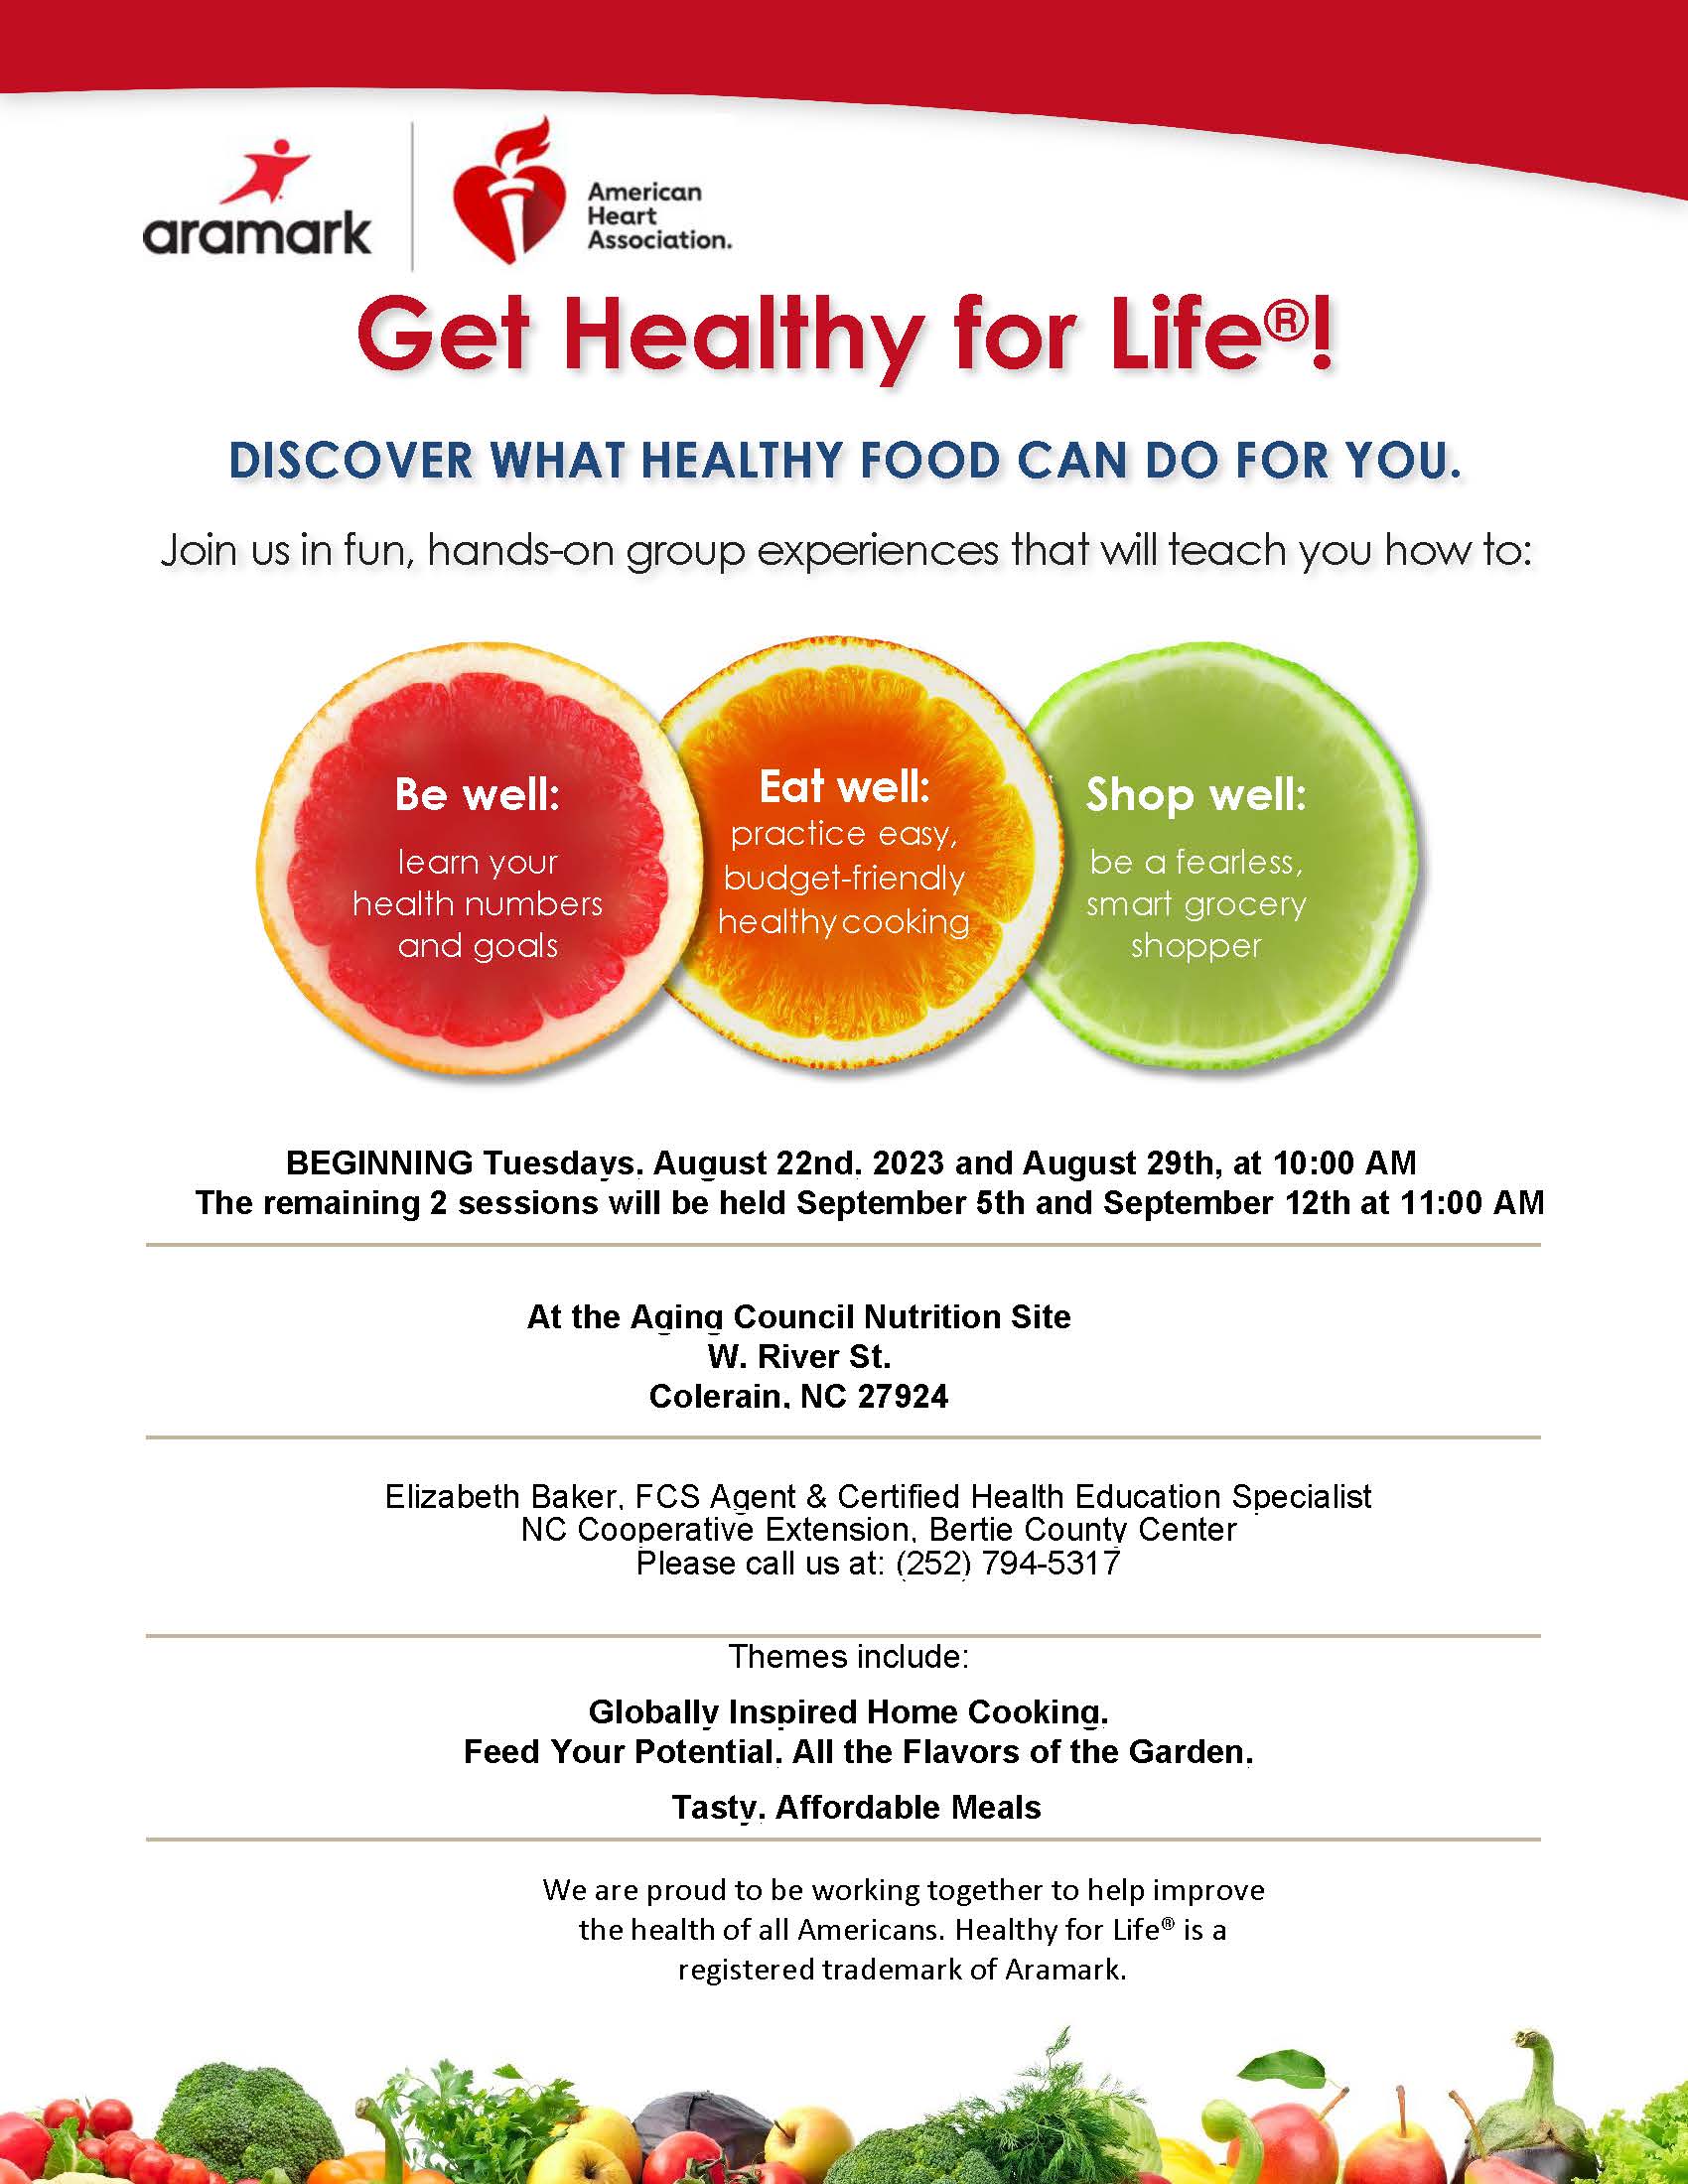 Get Healthy for Life Flyer